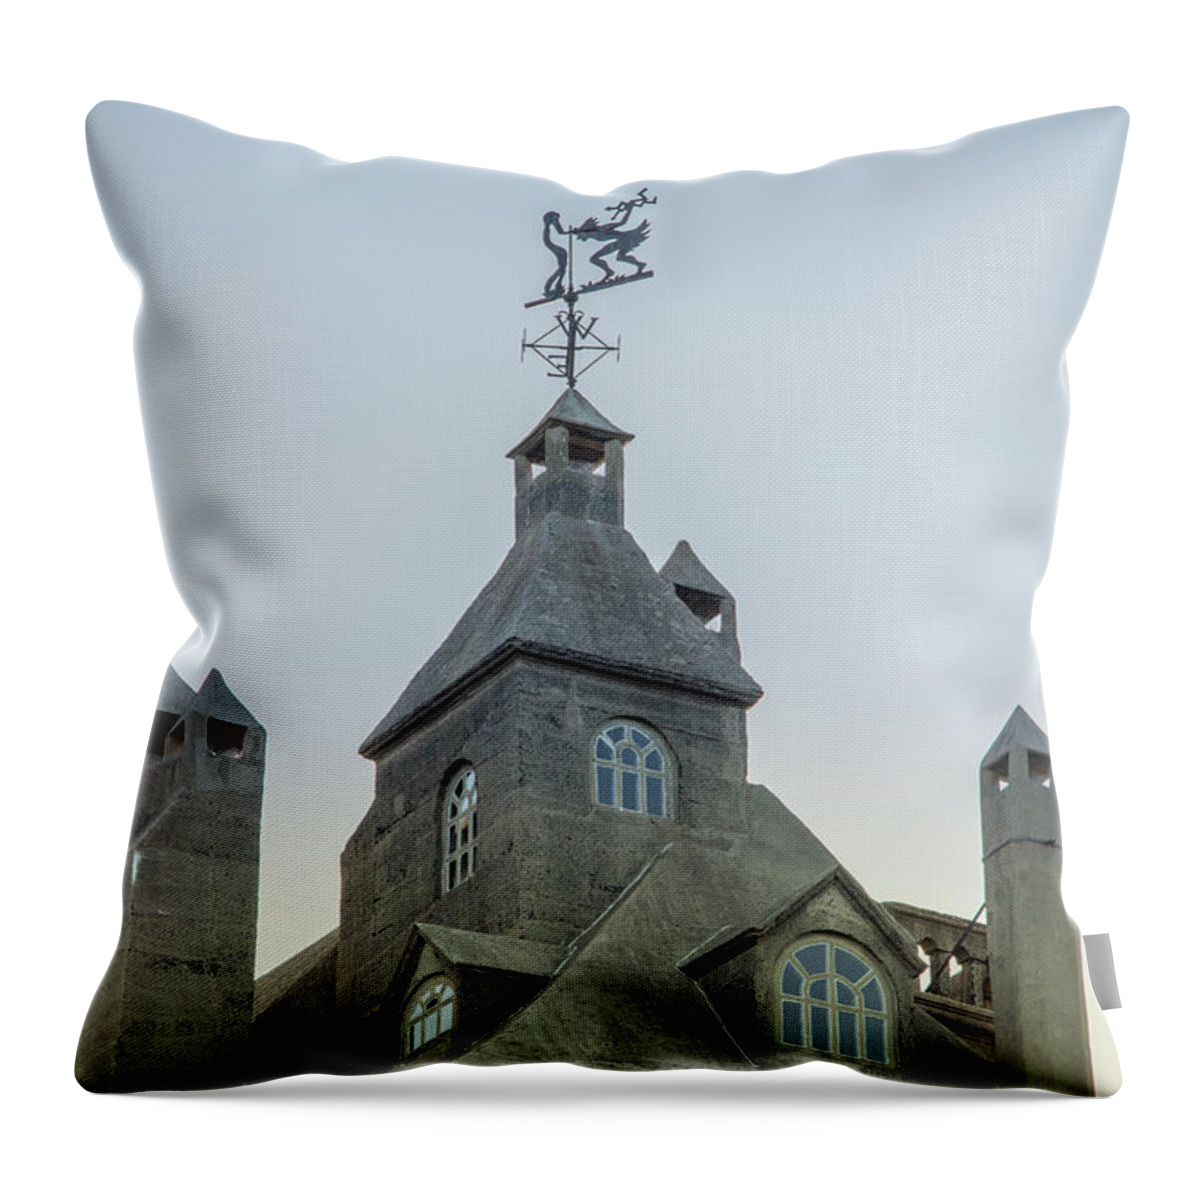 The Throw Pillow featuring the photograph The Top of the Mercer Museum - Bucks County Pennsylvania by Bill Cannon